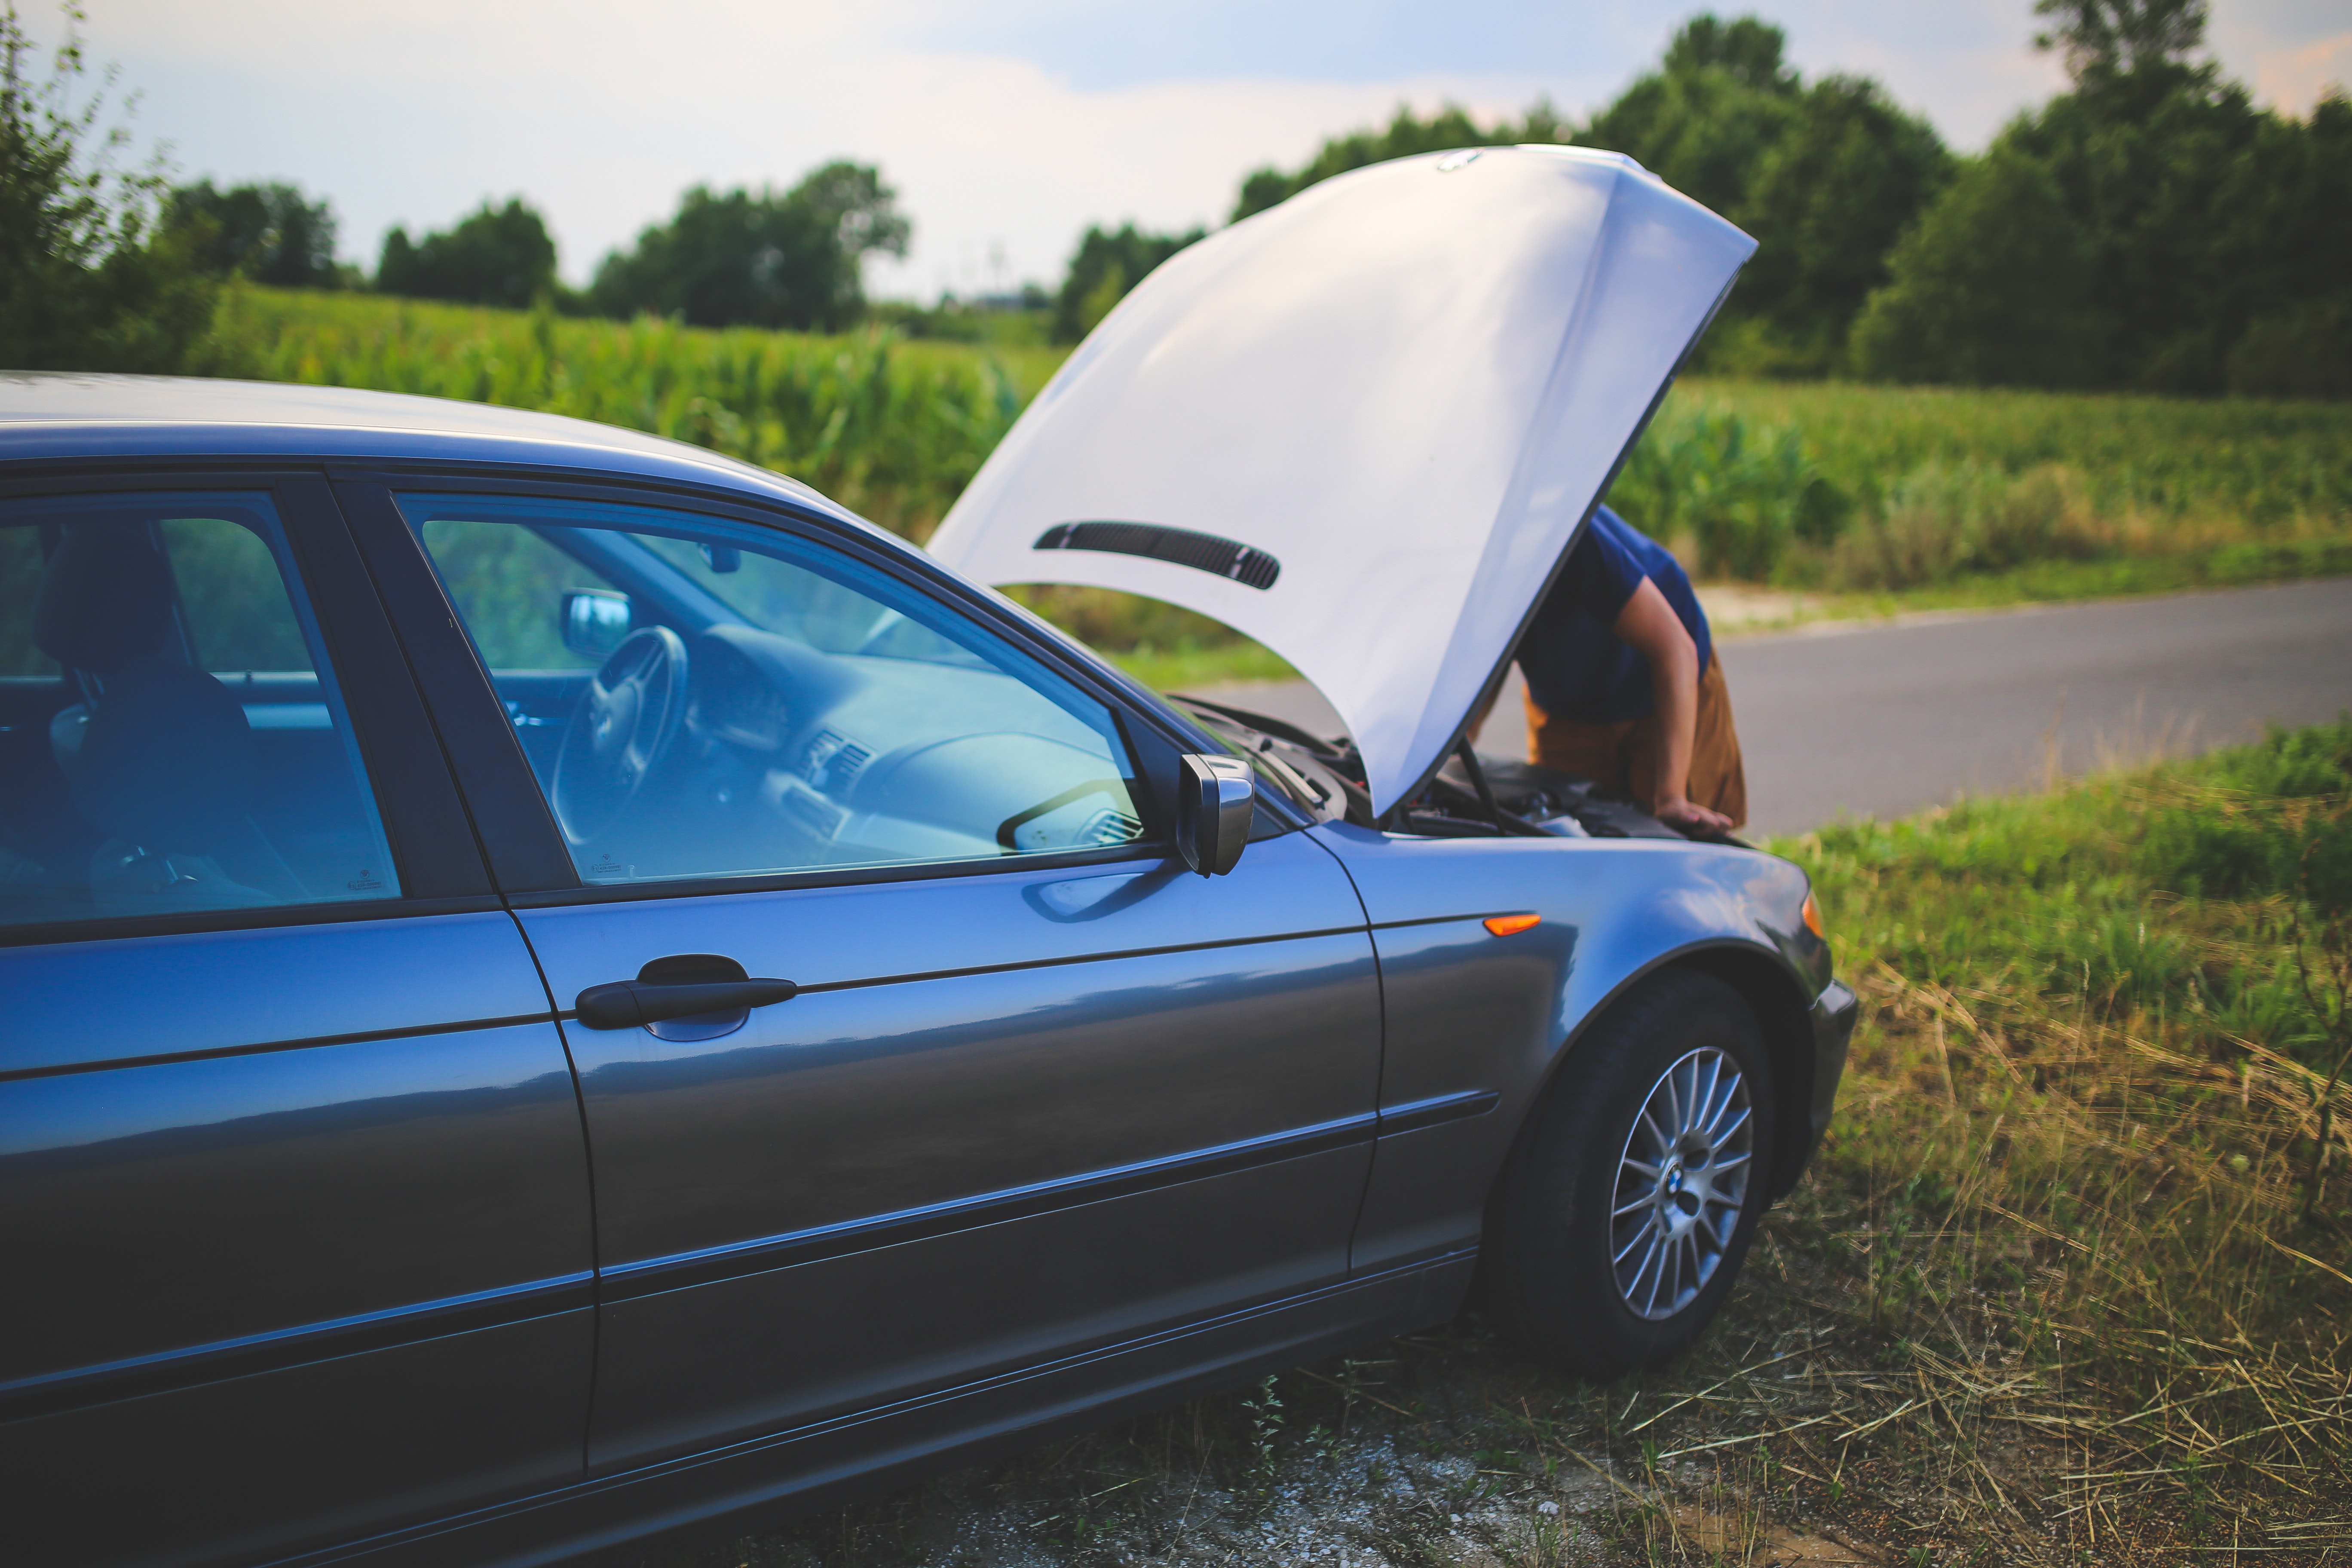 10 THINGS TO DO TO RECOVER FROM A CAR ACCIDENT